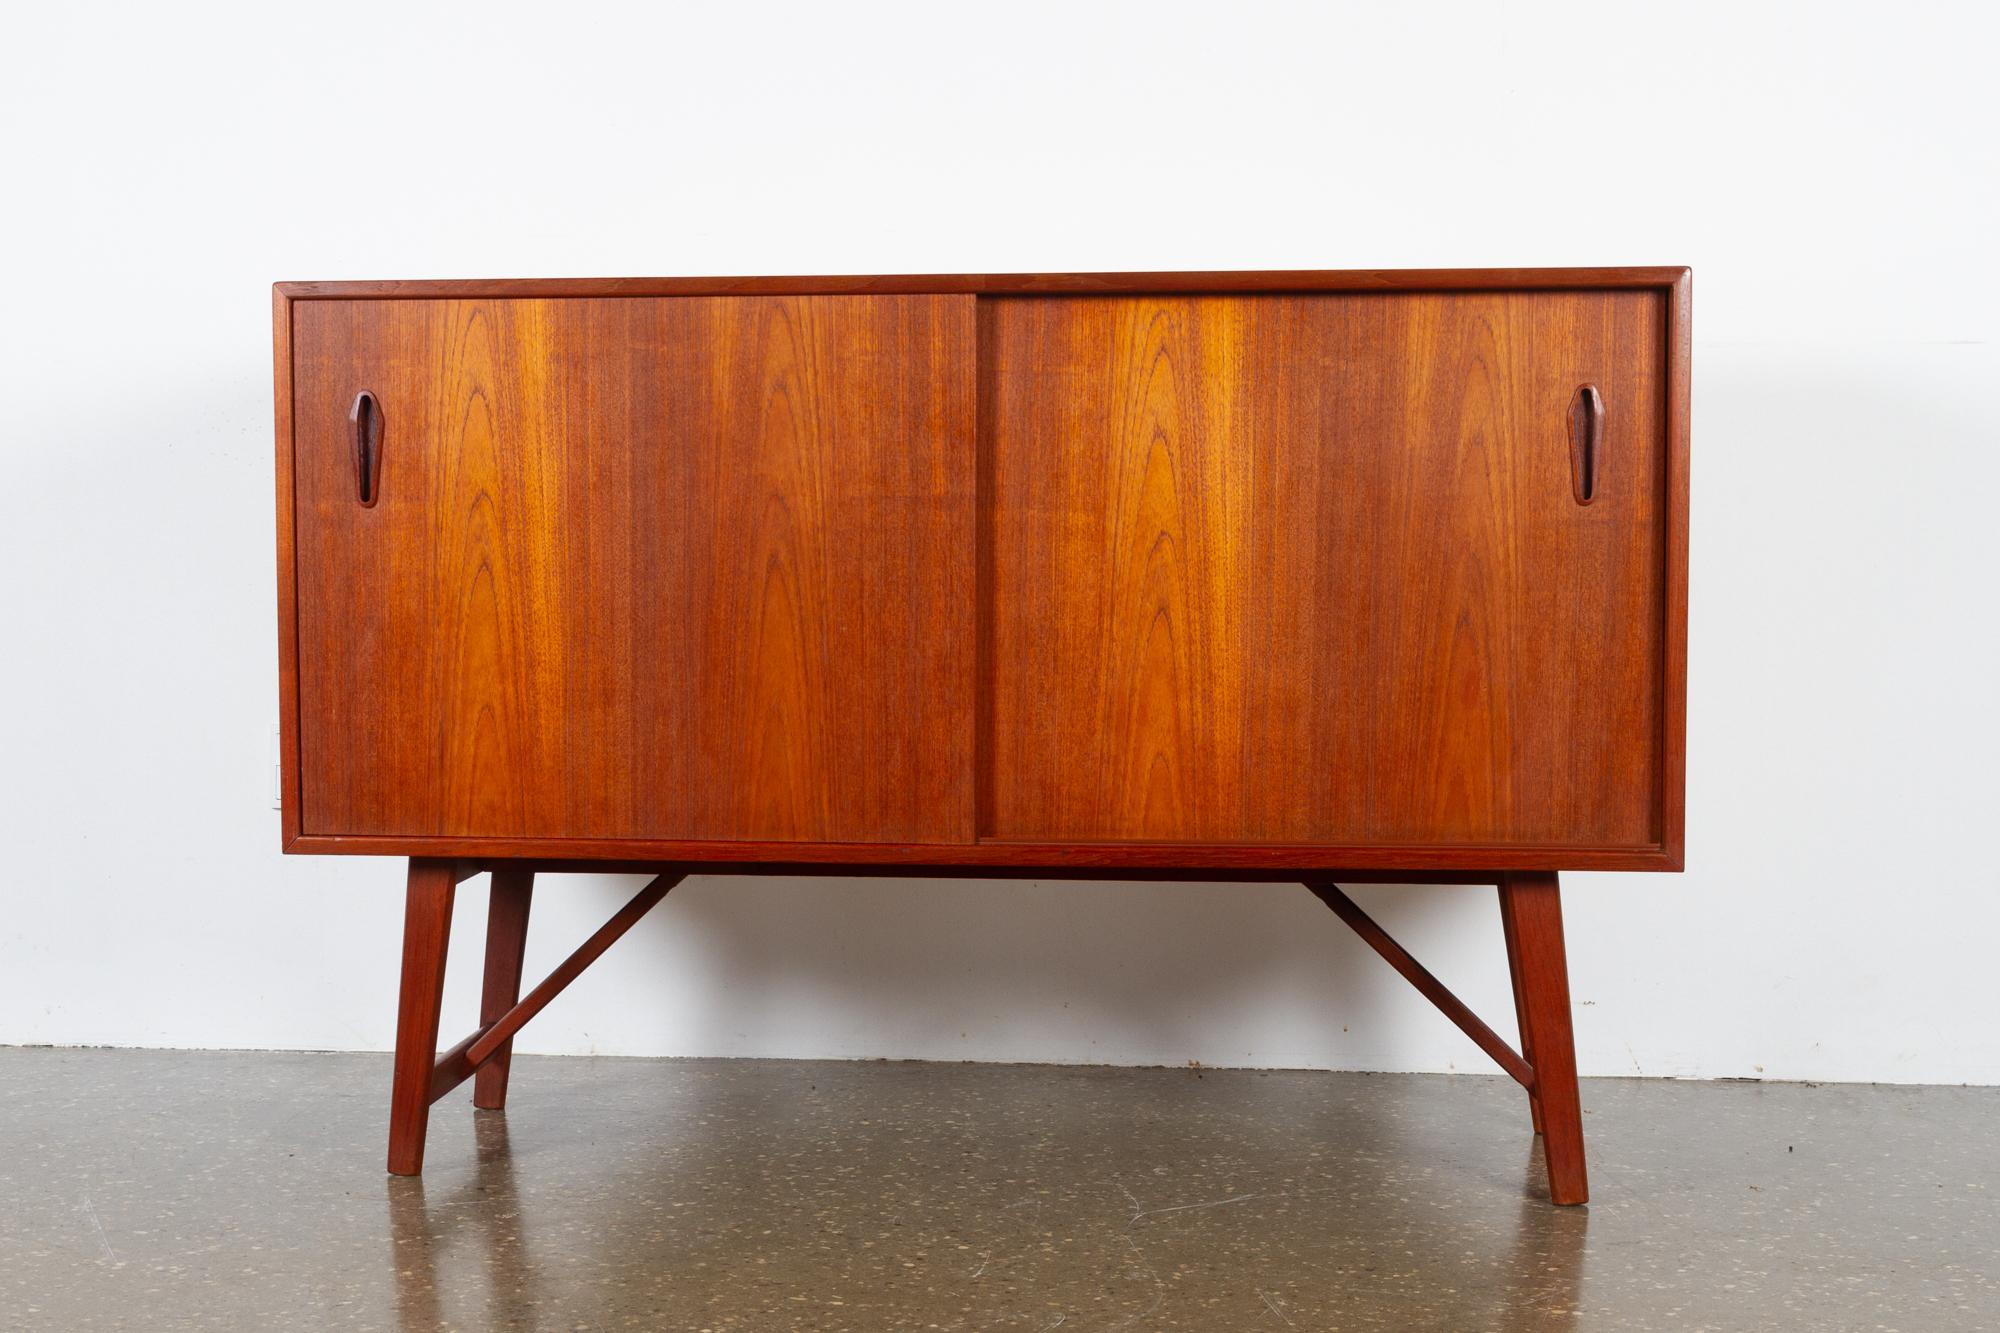 Vintage Danish teak sideboard, 1960s
Small and elegant Mid-Century Modern lowboard with double sliding doors and shelves.
Very nice warm and golden veneer color. Sculpted grips in solid teak. Slightly slanted legs. Frame and legs in solid teak. A